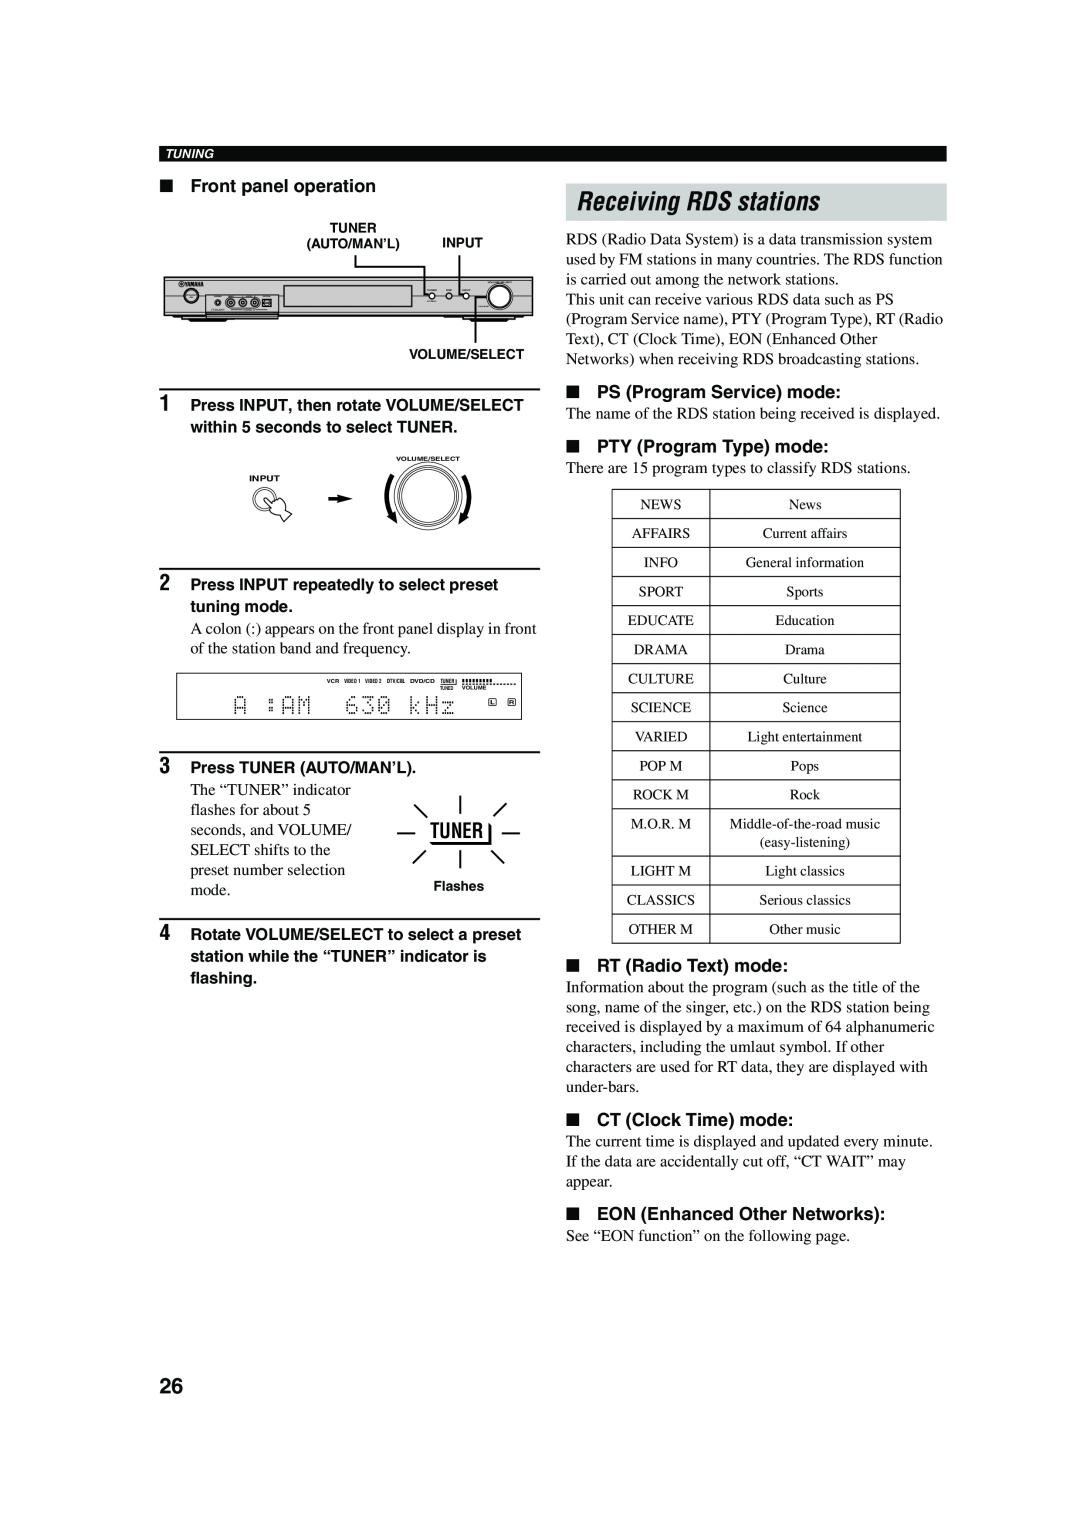 Yamaha RX-SL100RDS owner manual Receiving RDS stations, PS Program Service mode, PTY Program Type mode, RT Radio Text mode 